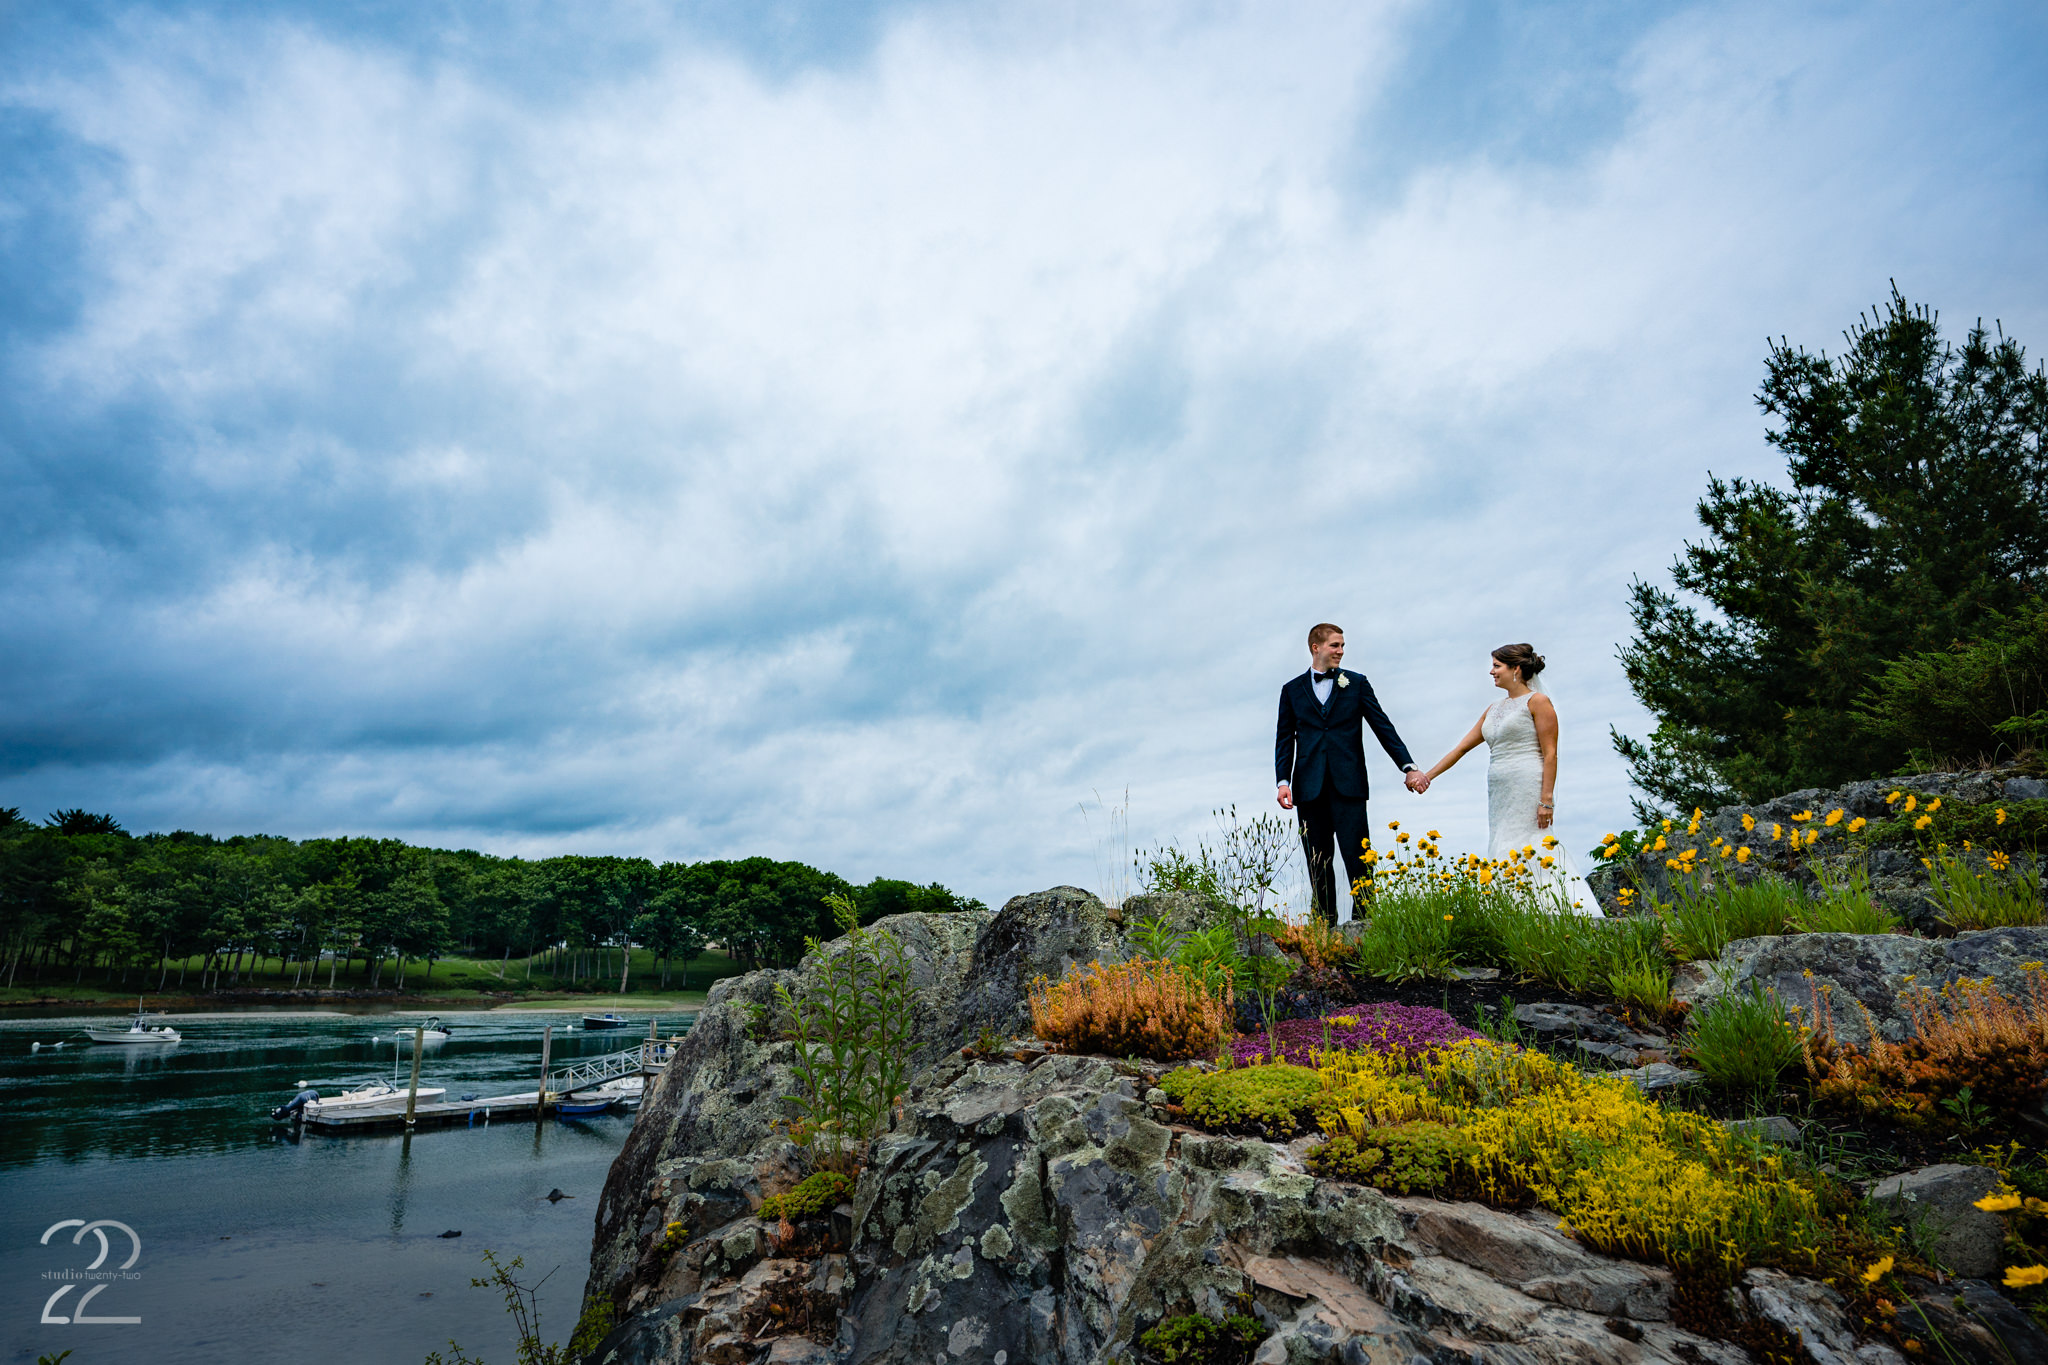  There is no shortage of exquisite locations to make formal wedding photos in Maine. 